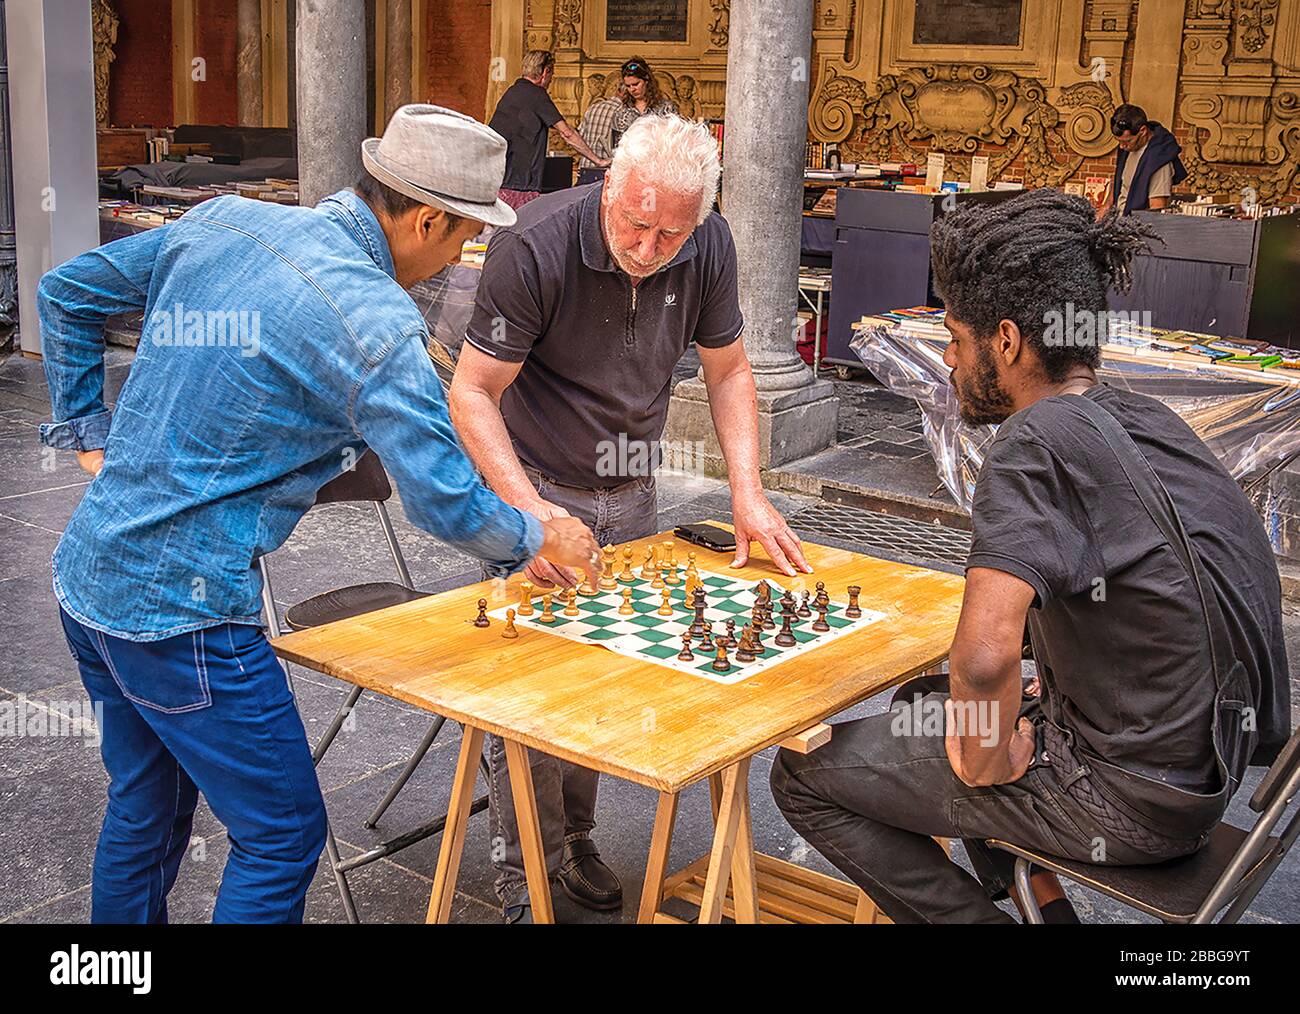 Three men involved in an alfresco chess game at a French market Stock Photo